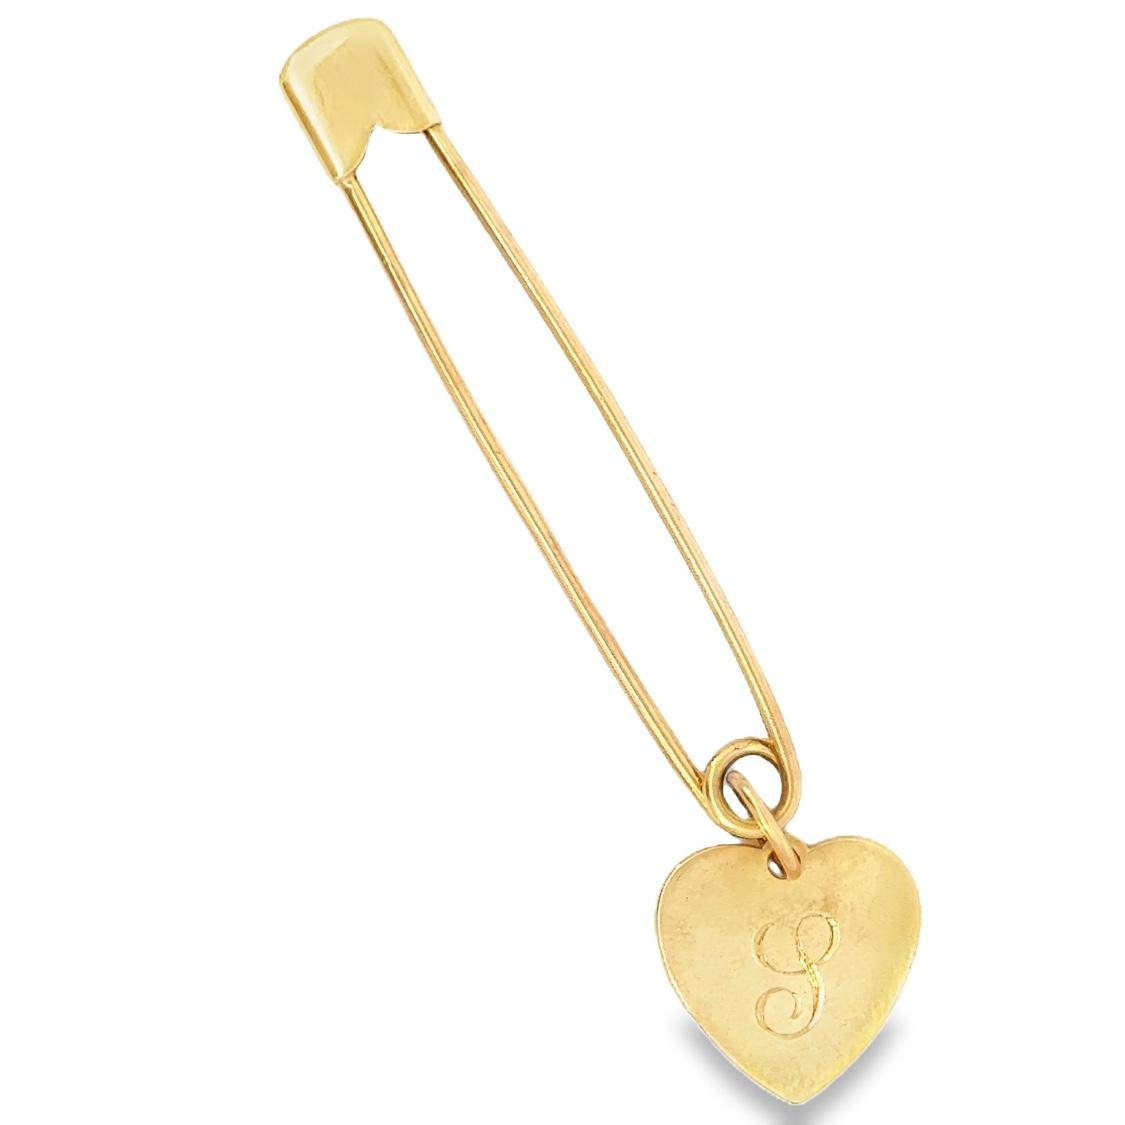 Vintage 14k Gold Charm Pin with Hanging Letter Heart